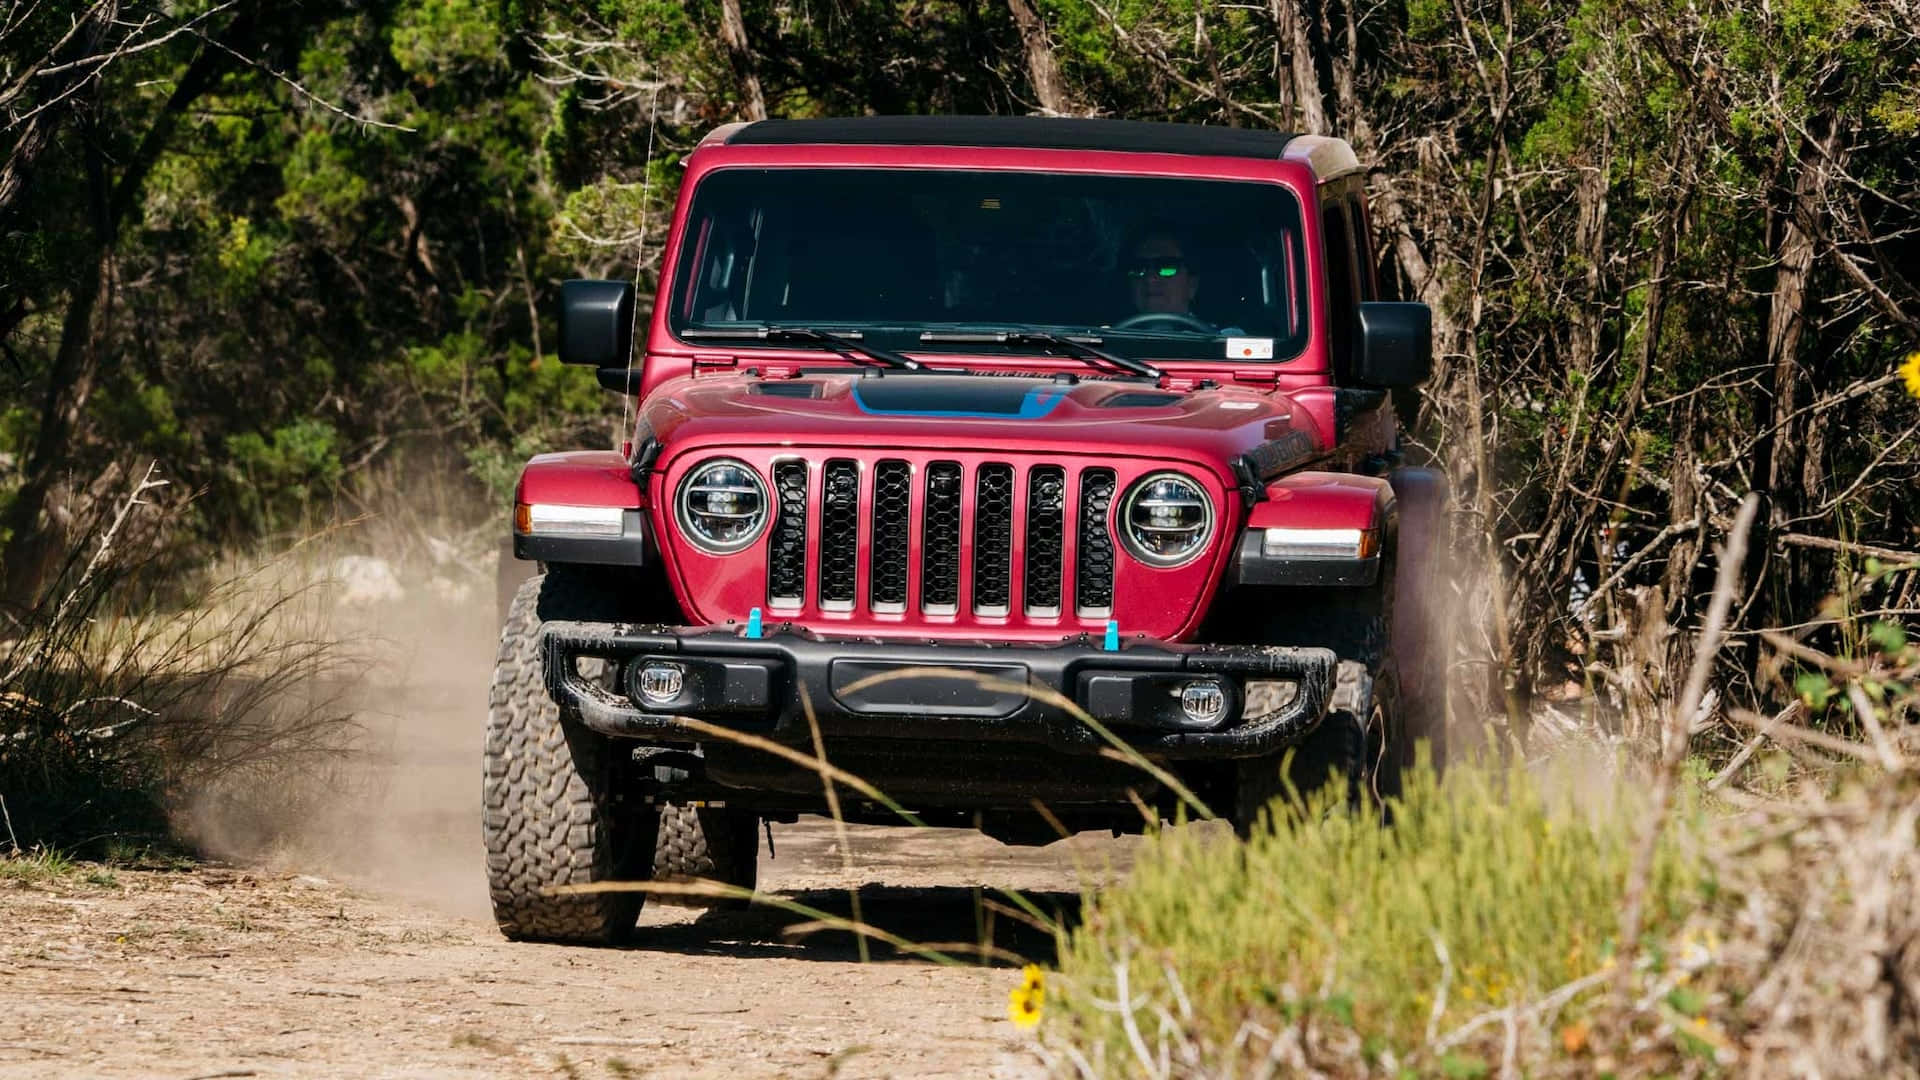 Get ready to explore the outdoors with a Jeep